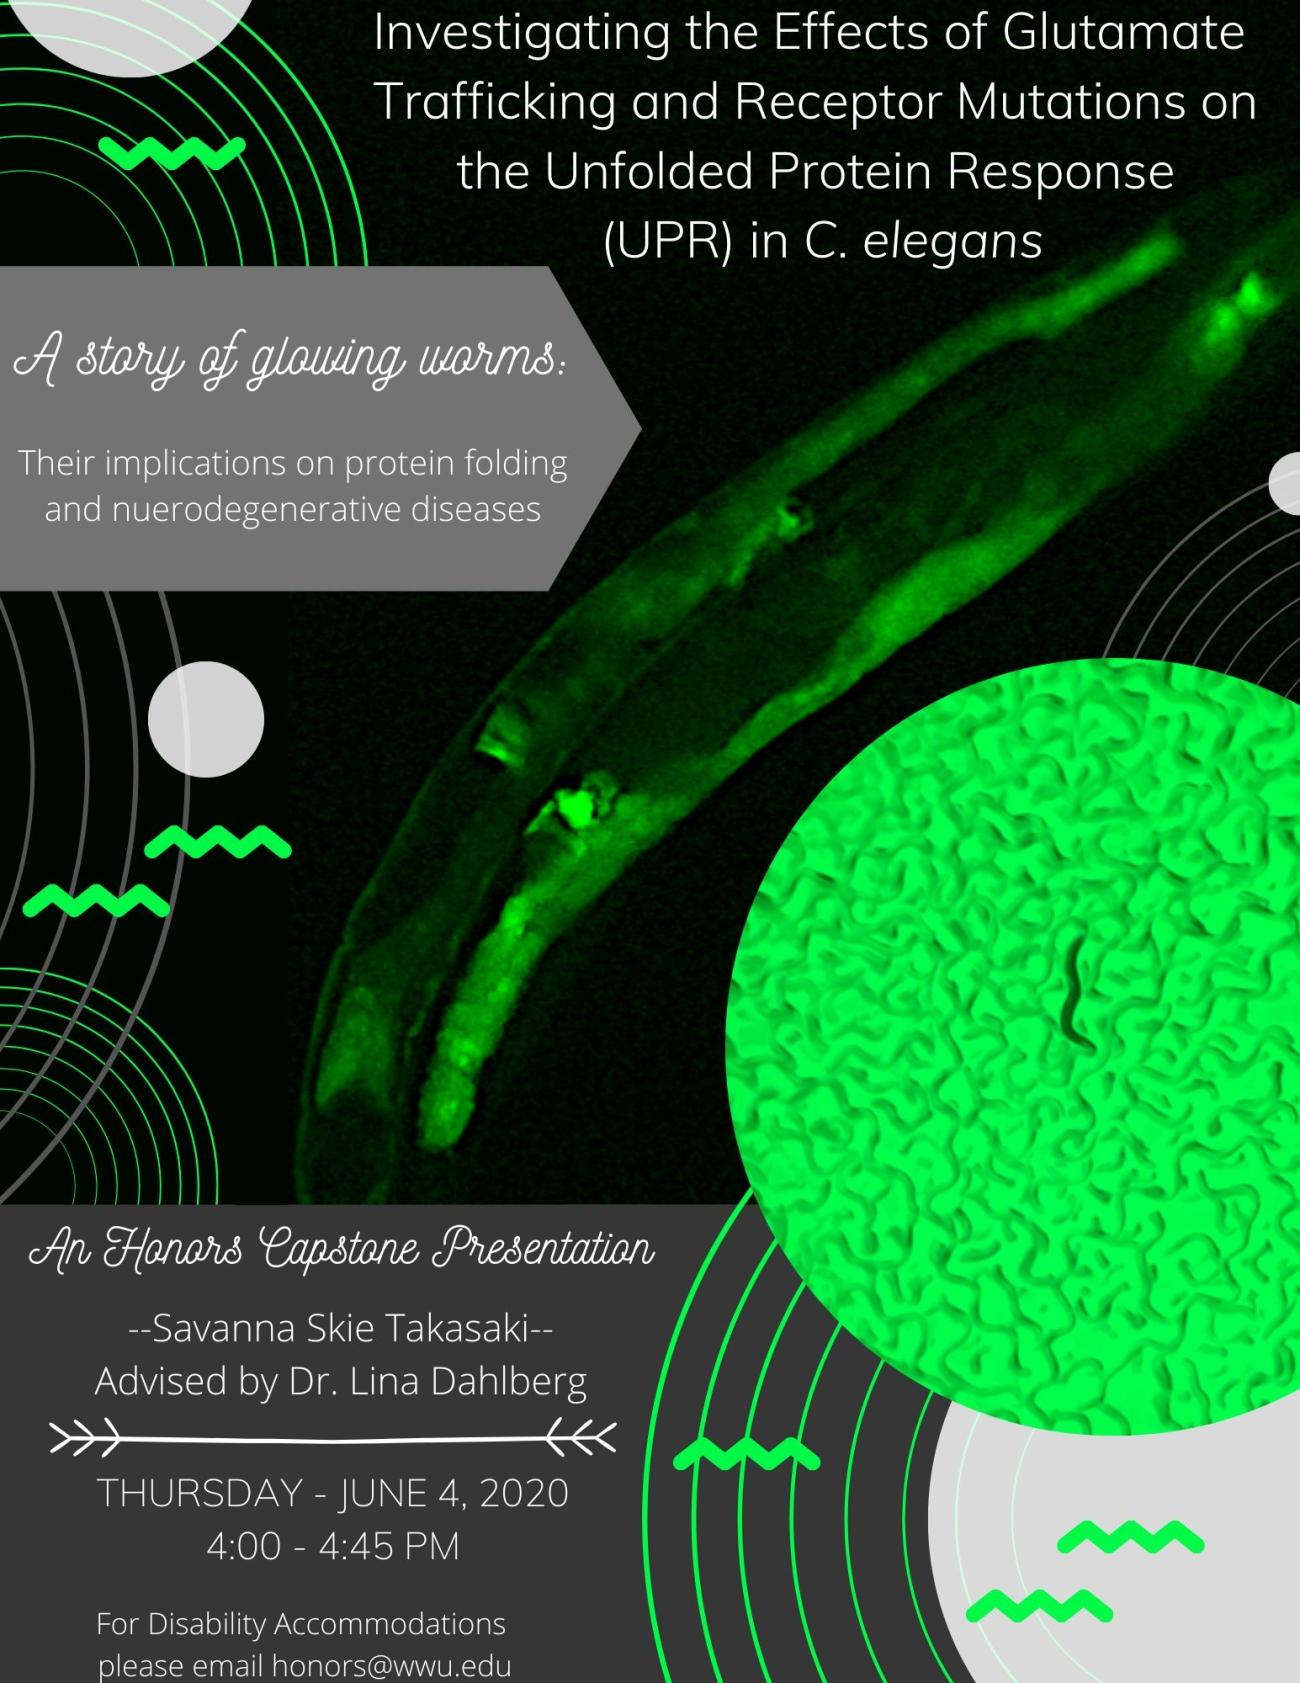 Image: "C. elegans worms fluorescing green under UV light displaying GFP expression. Text: "Investigating the Effects of Glutamate Trafficking and Receptor Mutations on the Unfolded Protein Response (UPR) in C. elegans. A story of glowing worms: Their implications on protein folding and neurodegenerative diseases. An Honors Capstone Presentation. Savanna Skie Takasaki, advised by Dr. Lina Dahlberg. Thursday June 4, 2020 4:00 - 4:45 AM. For disability accommodations please email honors@wwu.edu."